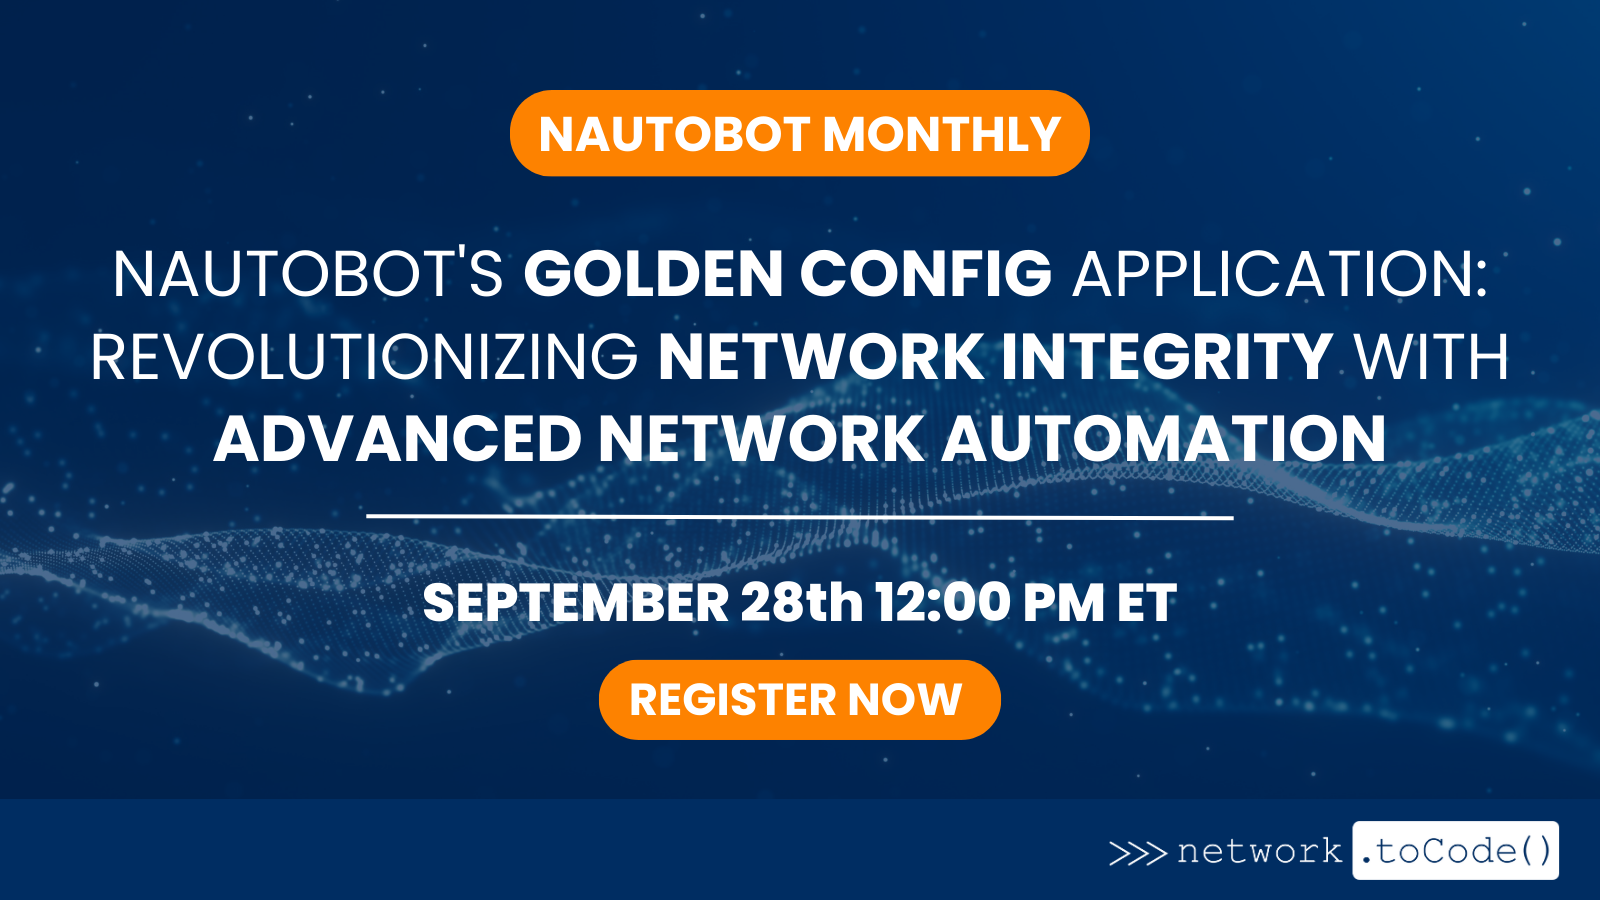 Nautobot Monthly | Nautobot’s Golden Config Application: Revolutionizing Network Integrity With Advanced Network Automation